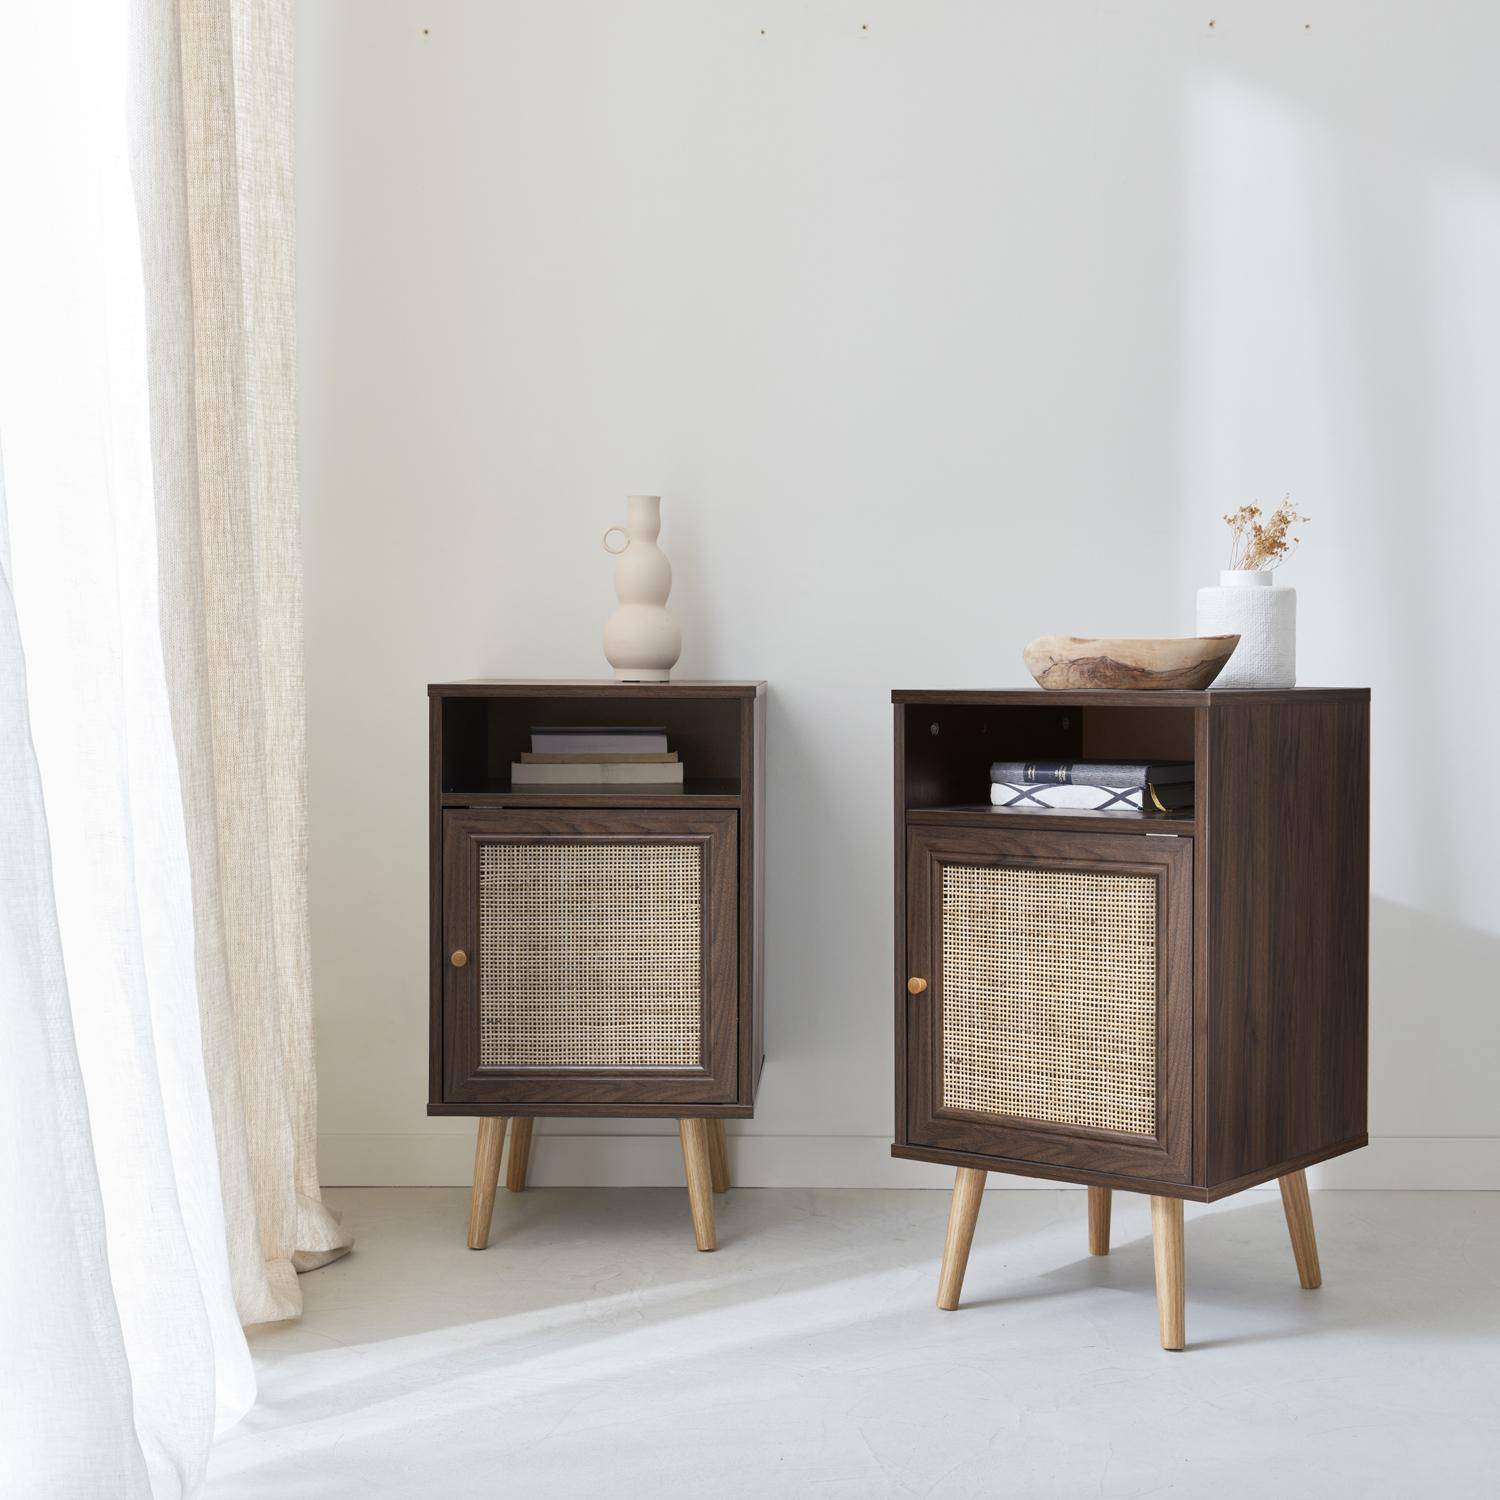 Pair of Scandi-style wood and cane rattan bedside tables with cupboard, 40x39x70cm - Boheme - Dark Wood colour Photo1